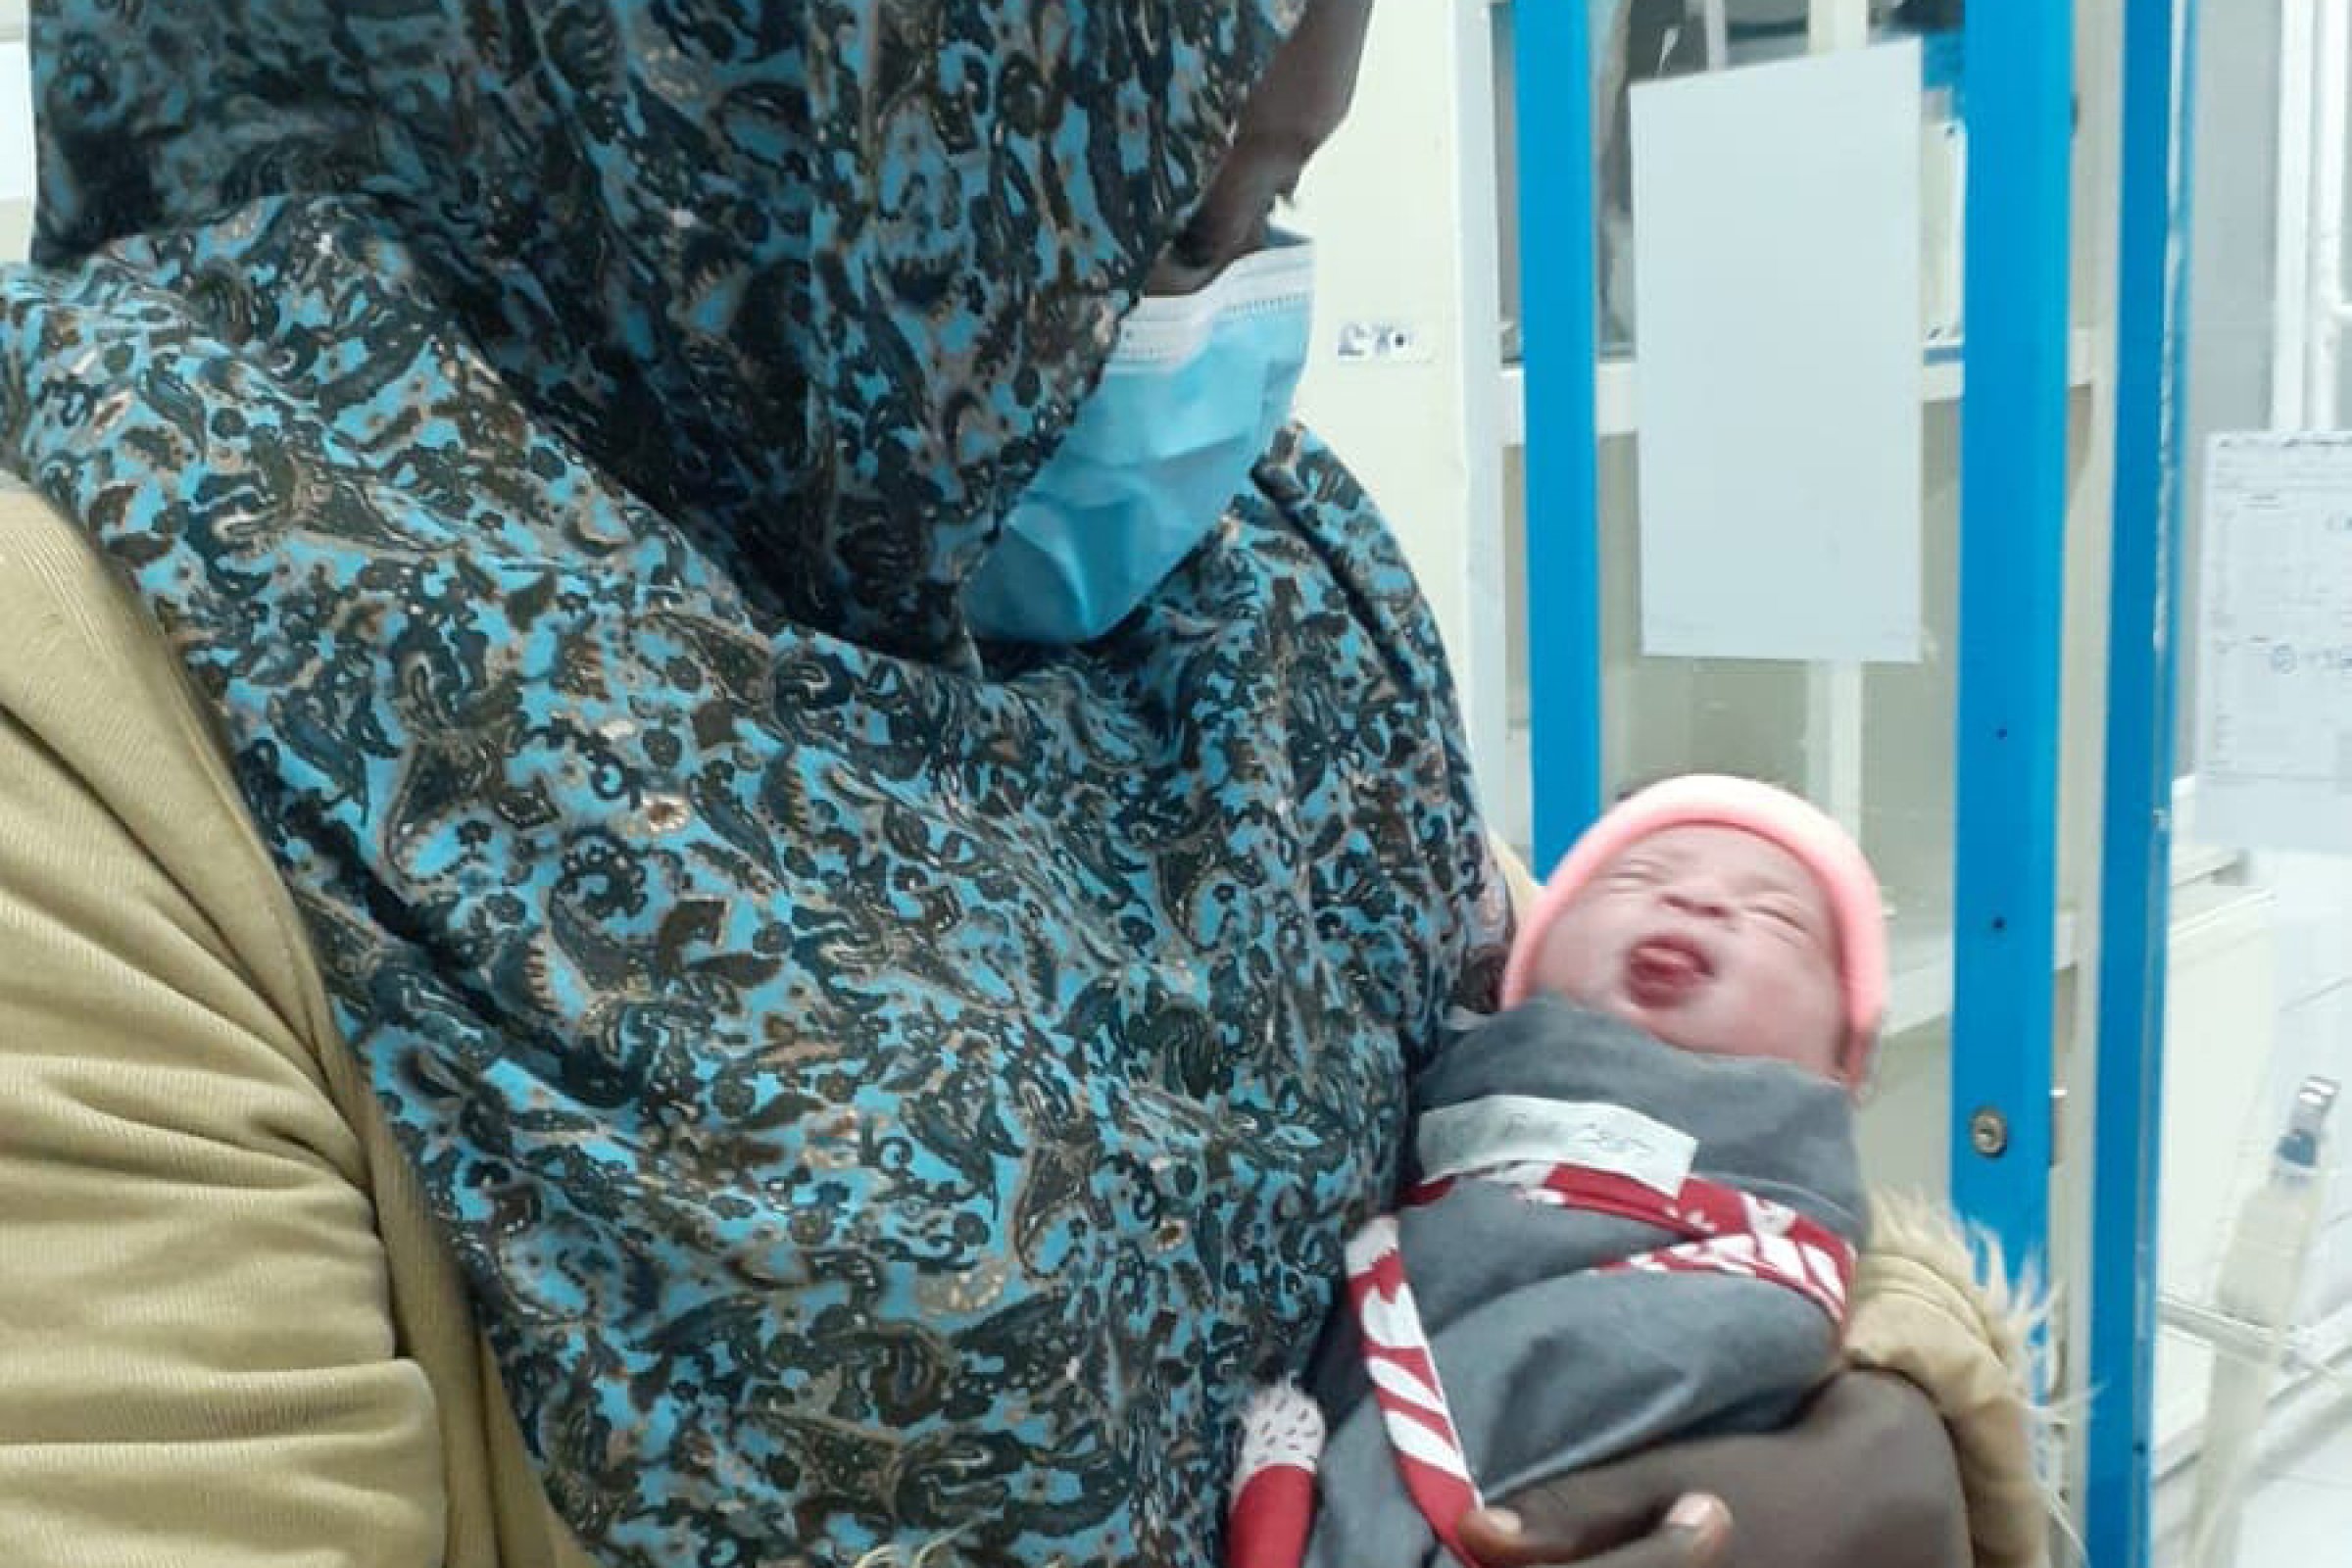 The newborn baby girl at Khost, ending the year in style